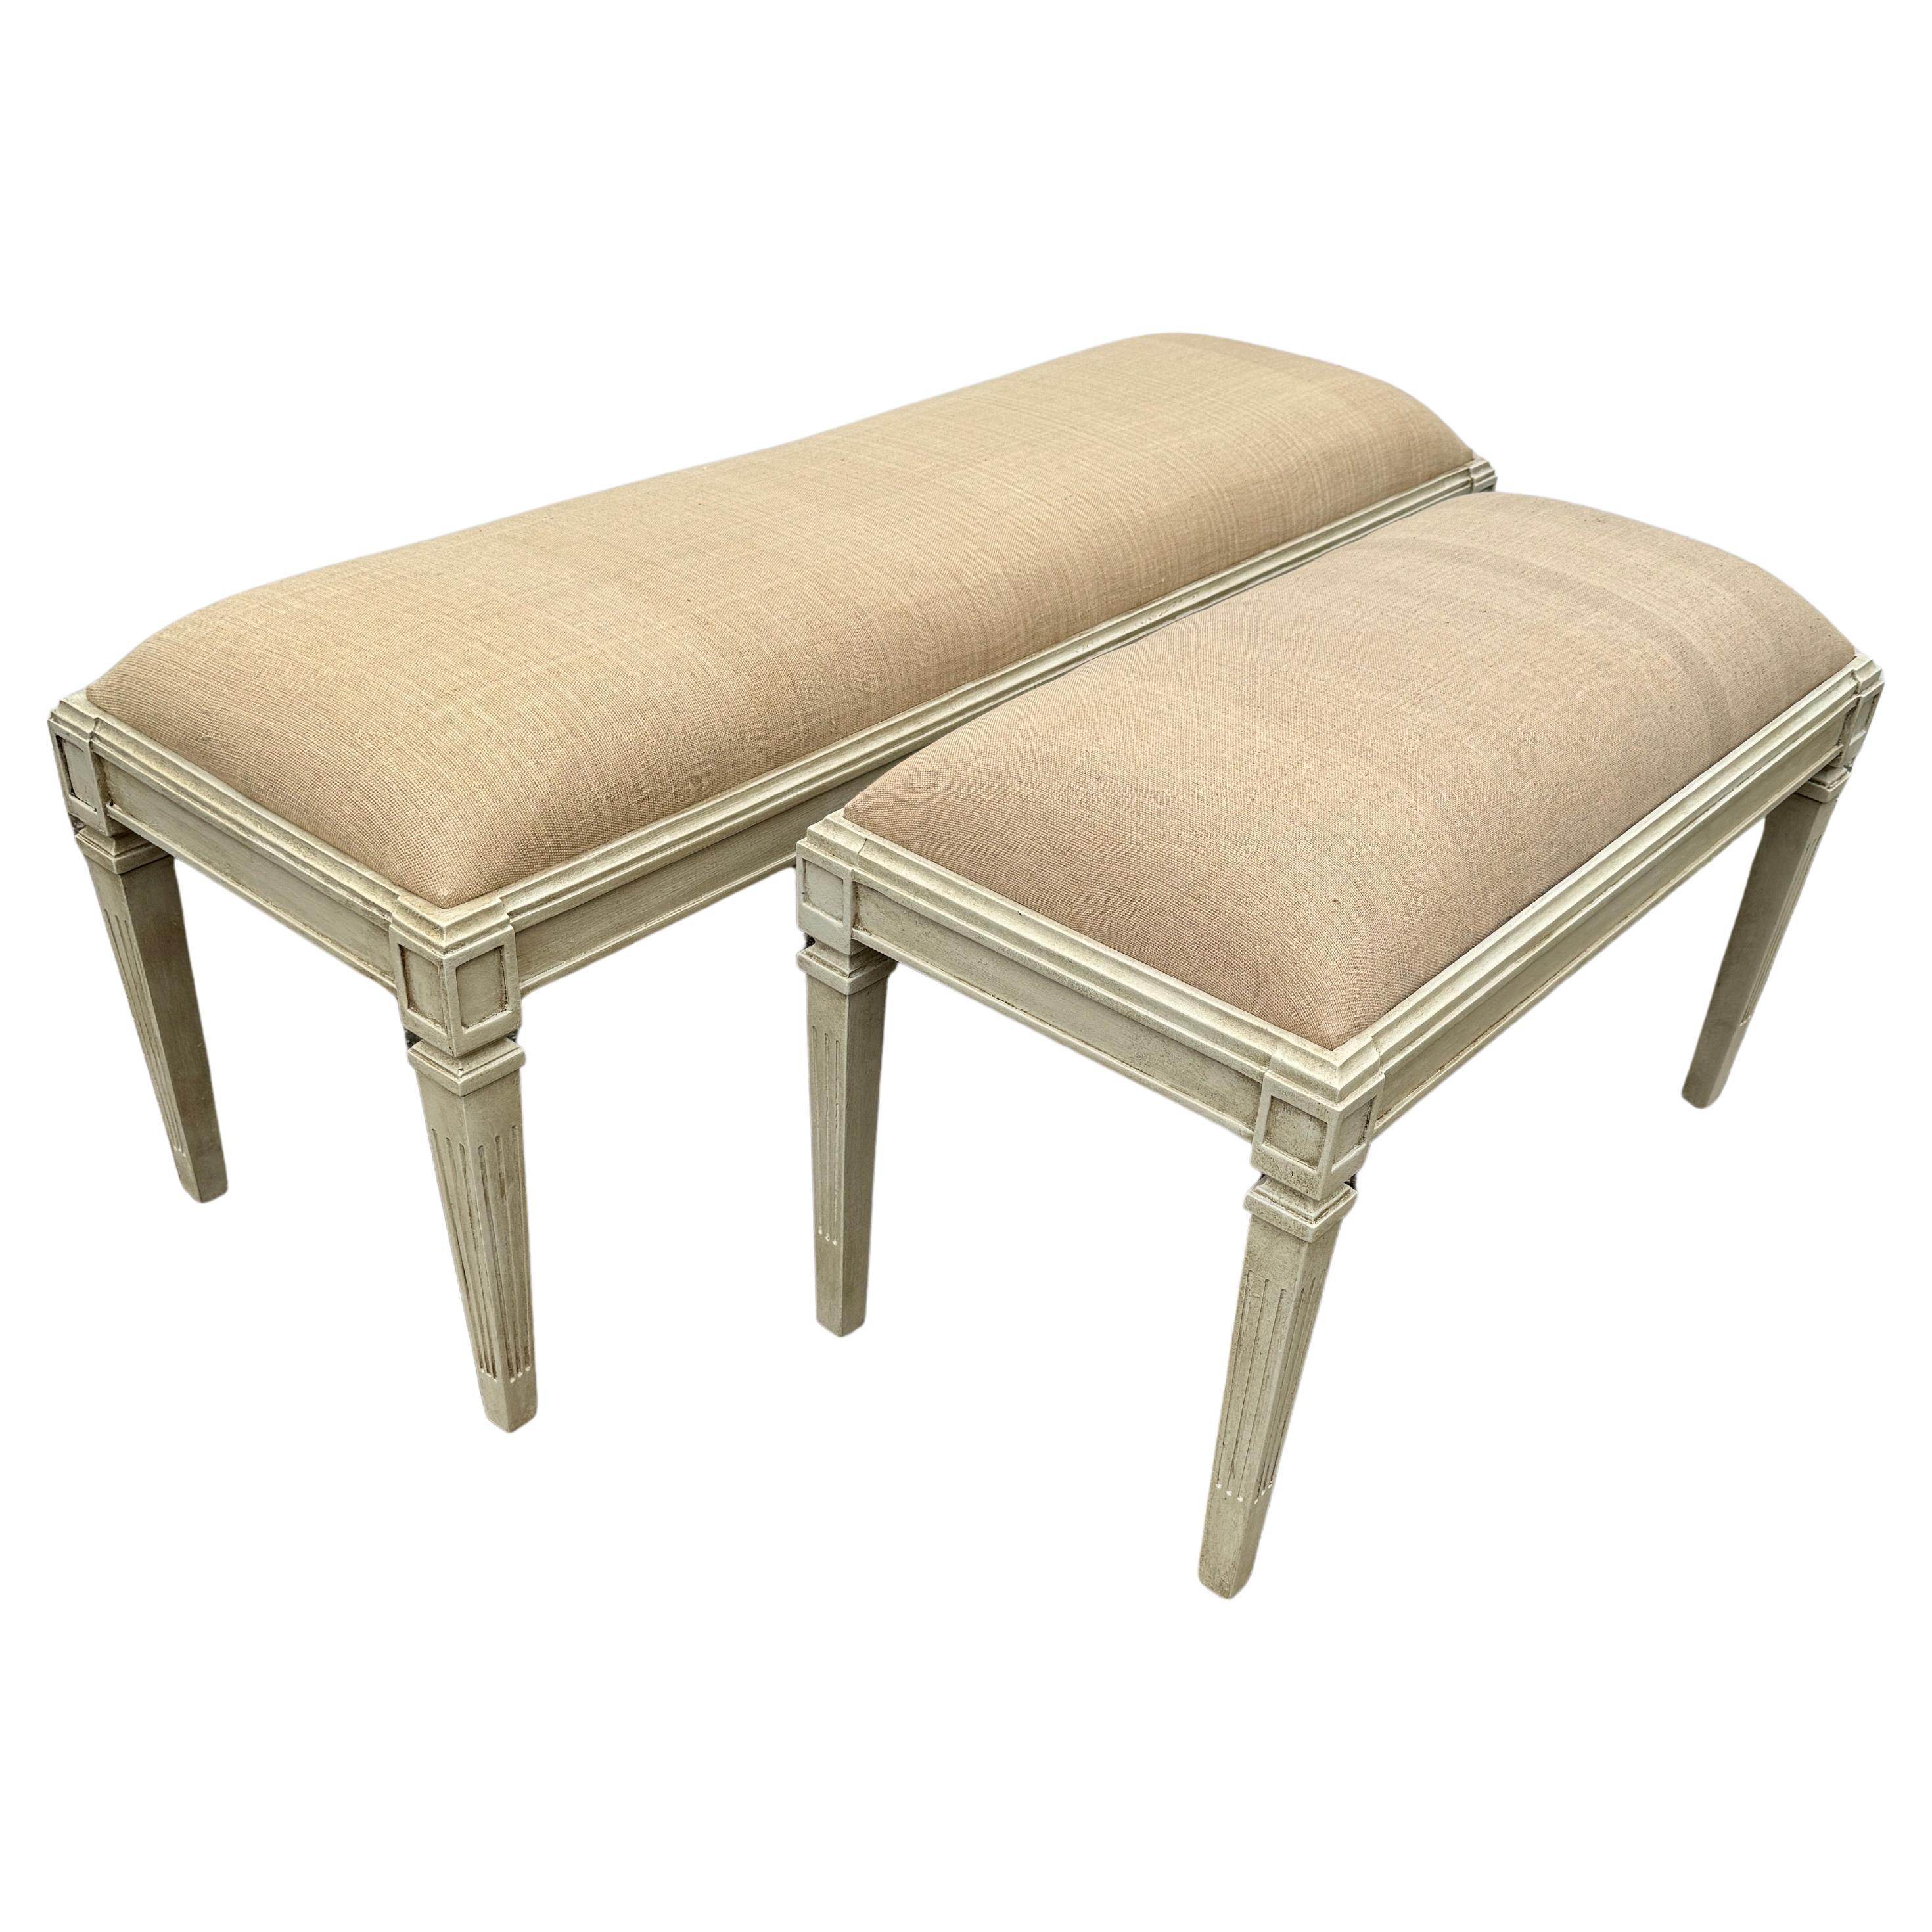 Set of Swedish Gustavian Style Painted Upholstered Benches, Two Different Sizes